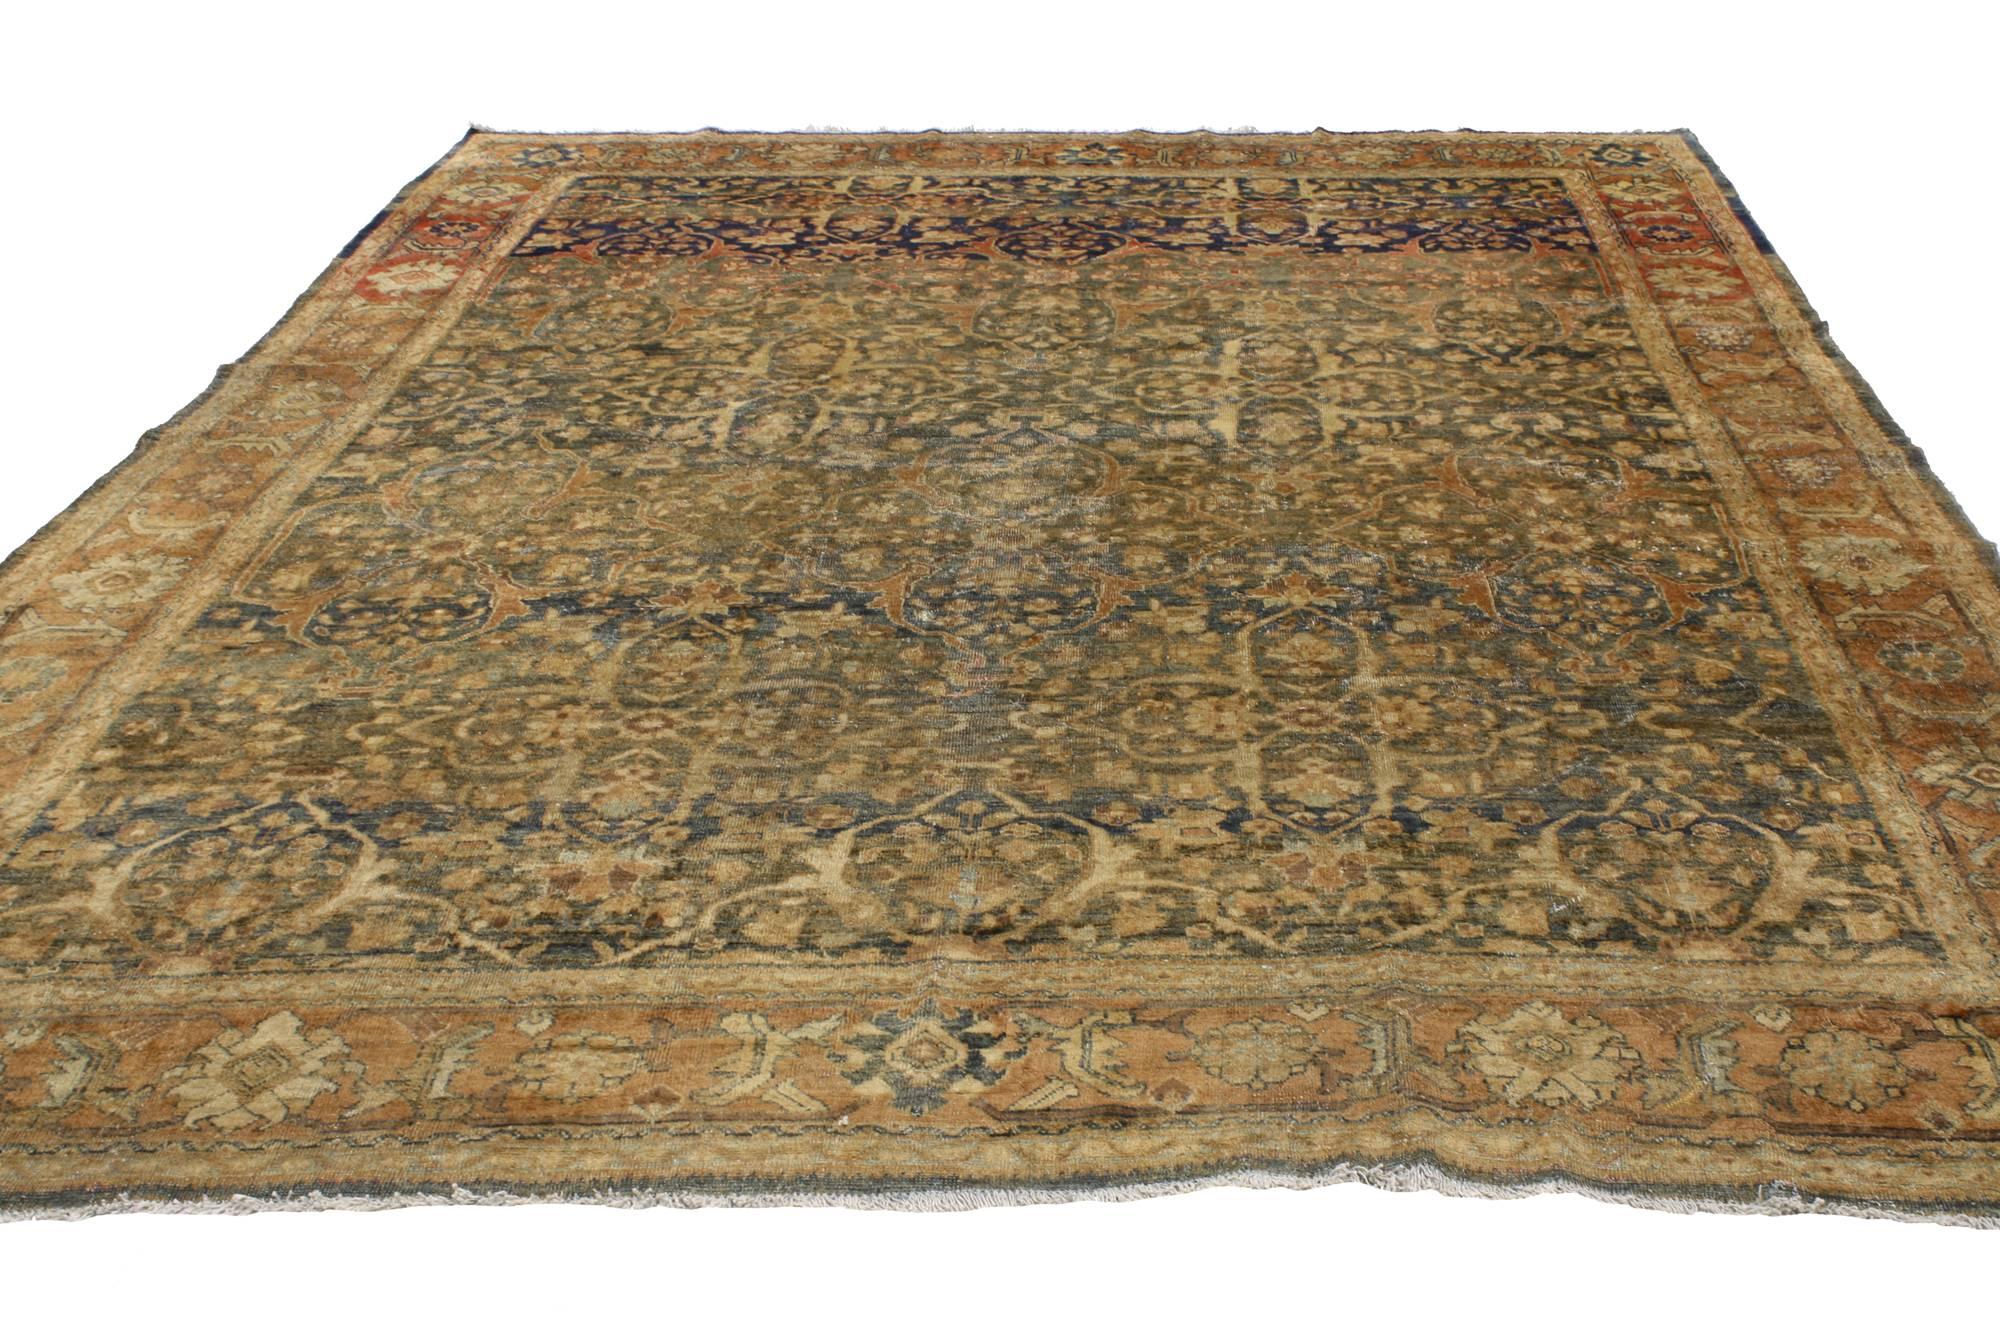 76861 Distressed Antique Persian Mahal Rug with Rustic English Traditional Style 08'10 x 11'03. With its perfectly worn-in charm and rustic sensibility, this hand-knotted wool distressed antique Persian Mahal rug will take on a curated lived-in look